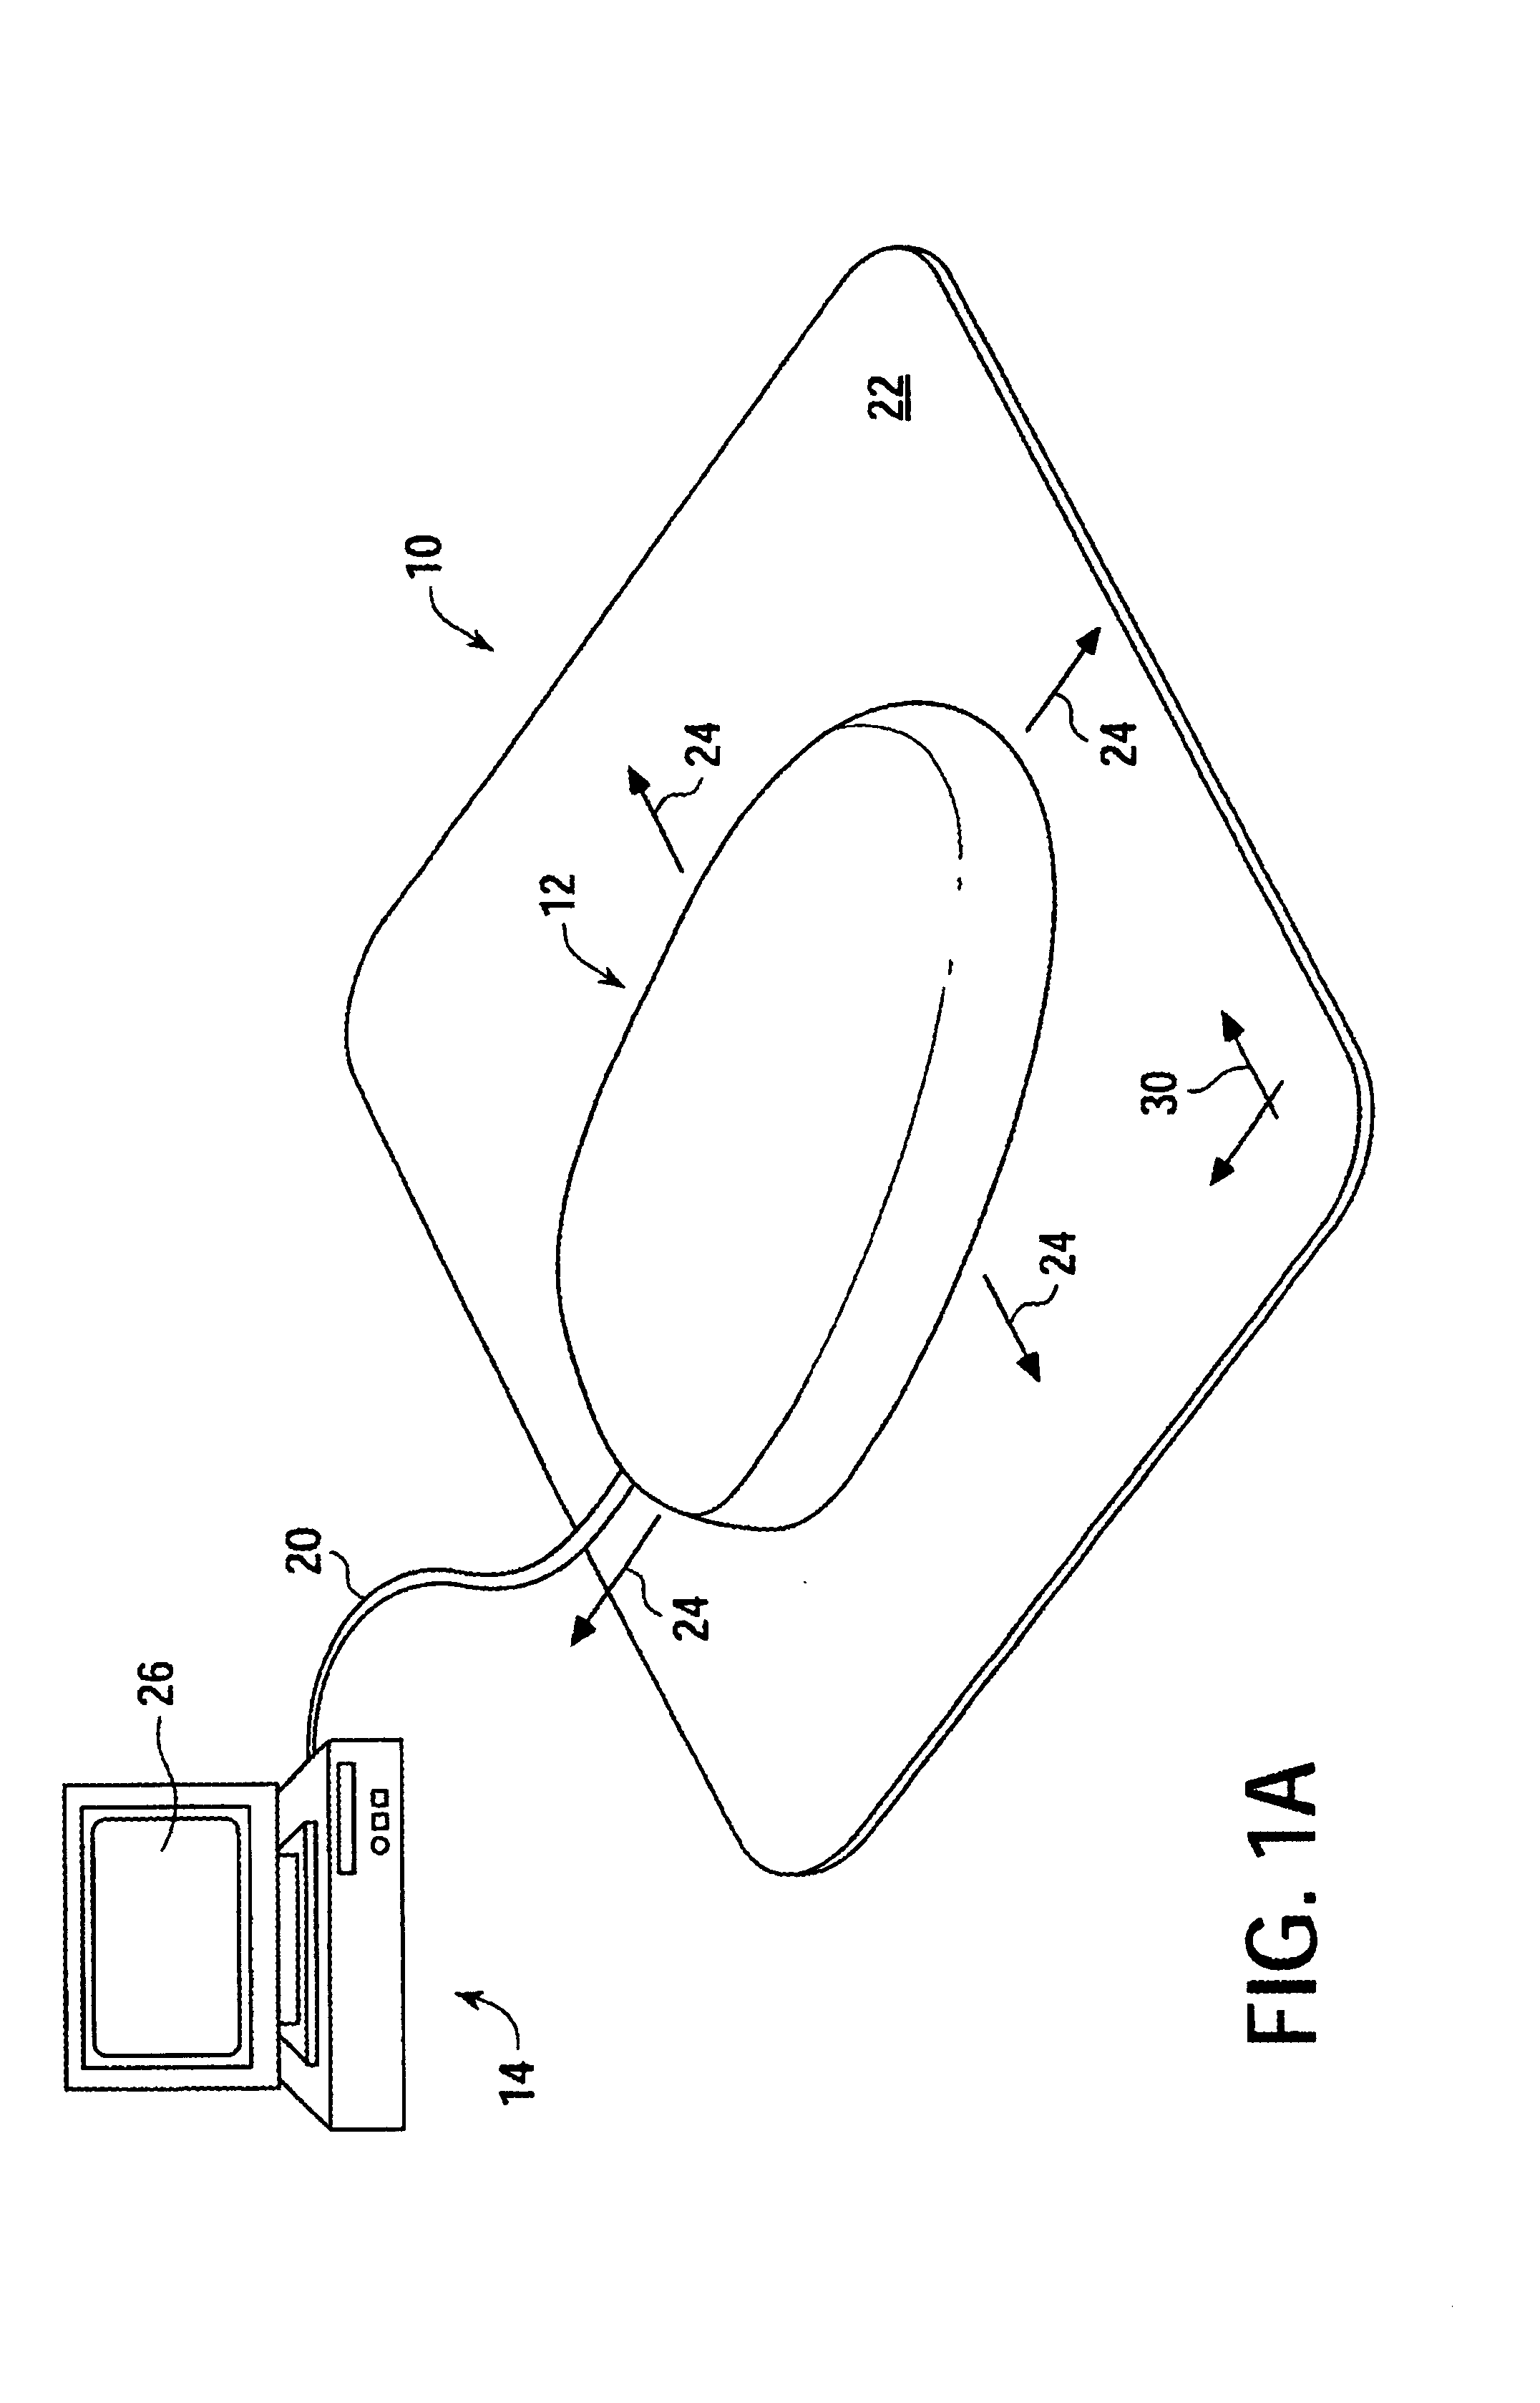 Actuator for providing tactile sensations and device for directional tactile sensations